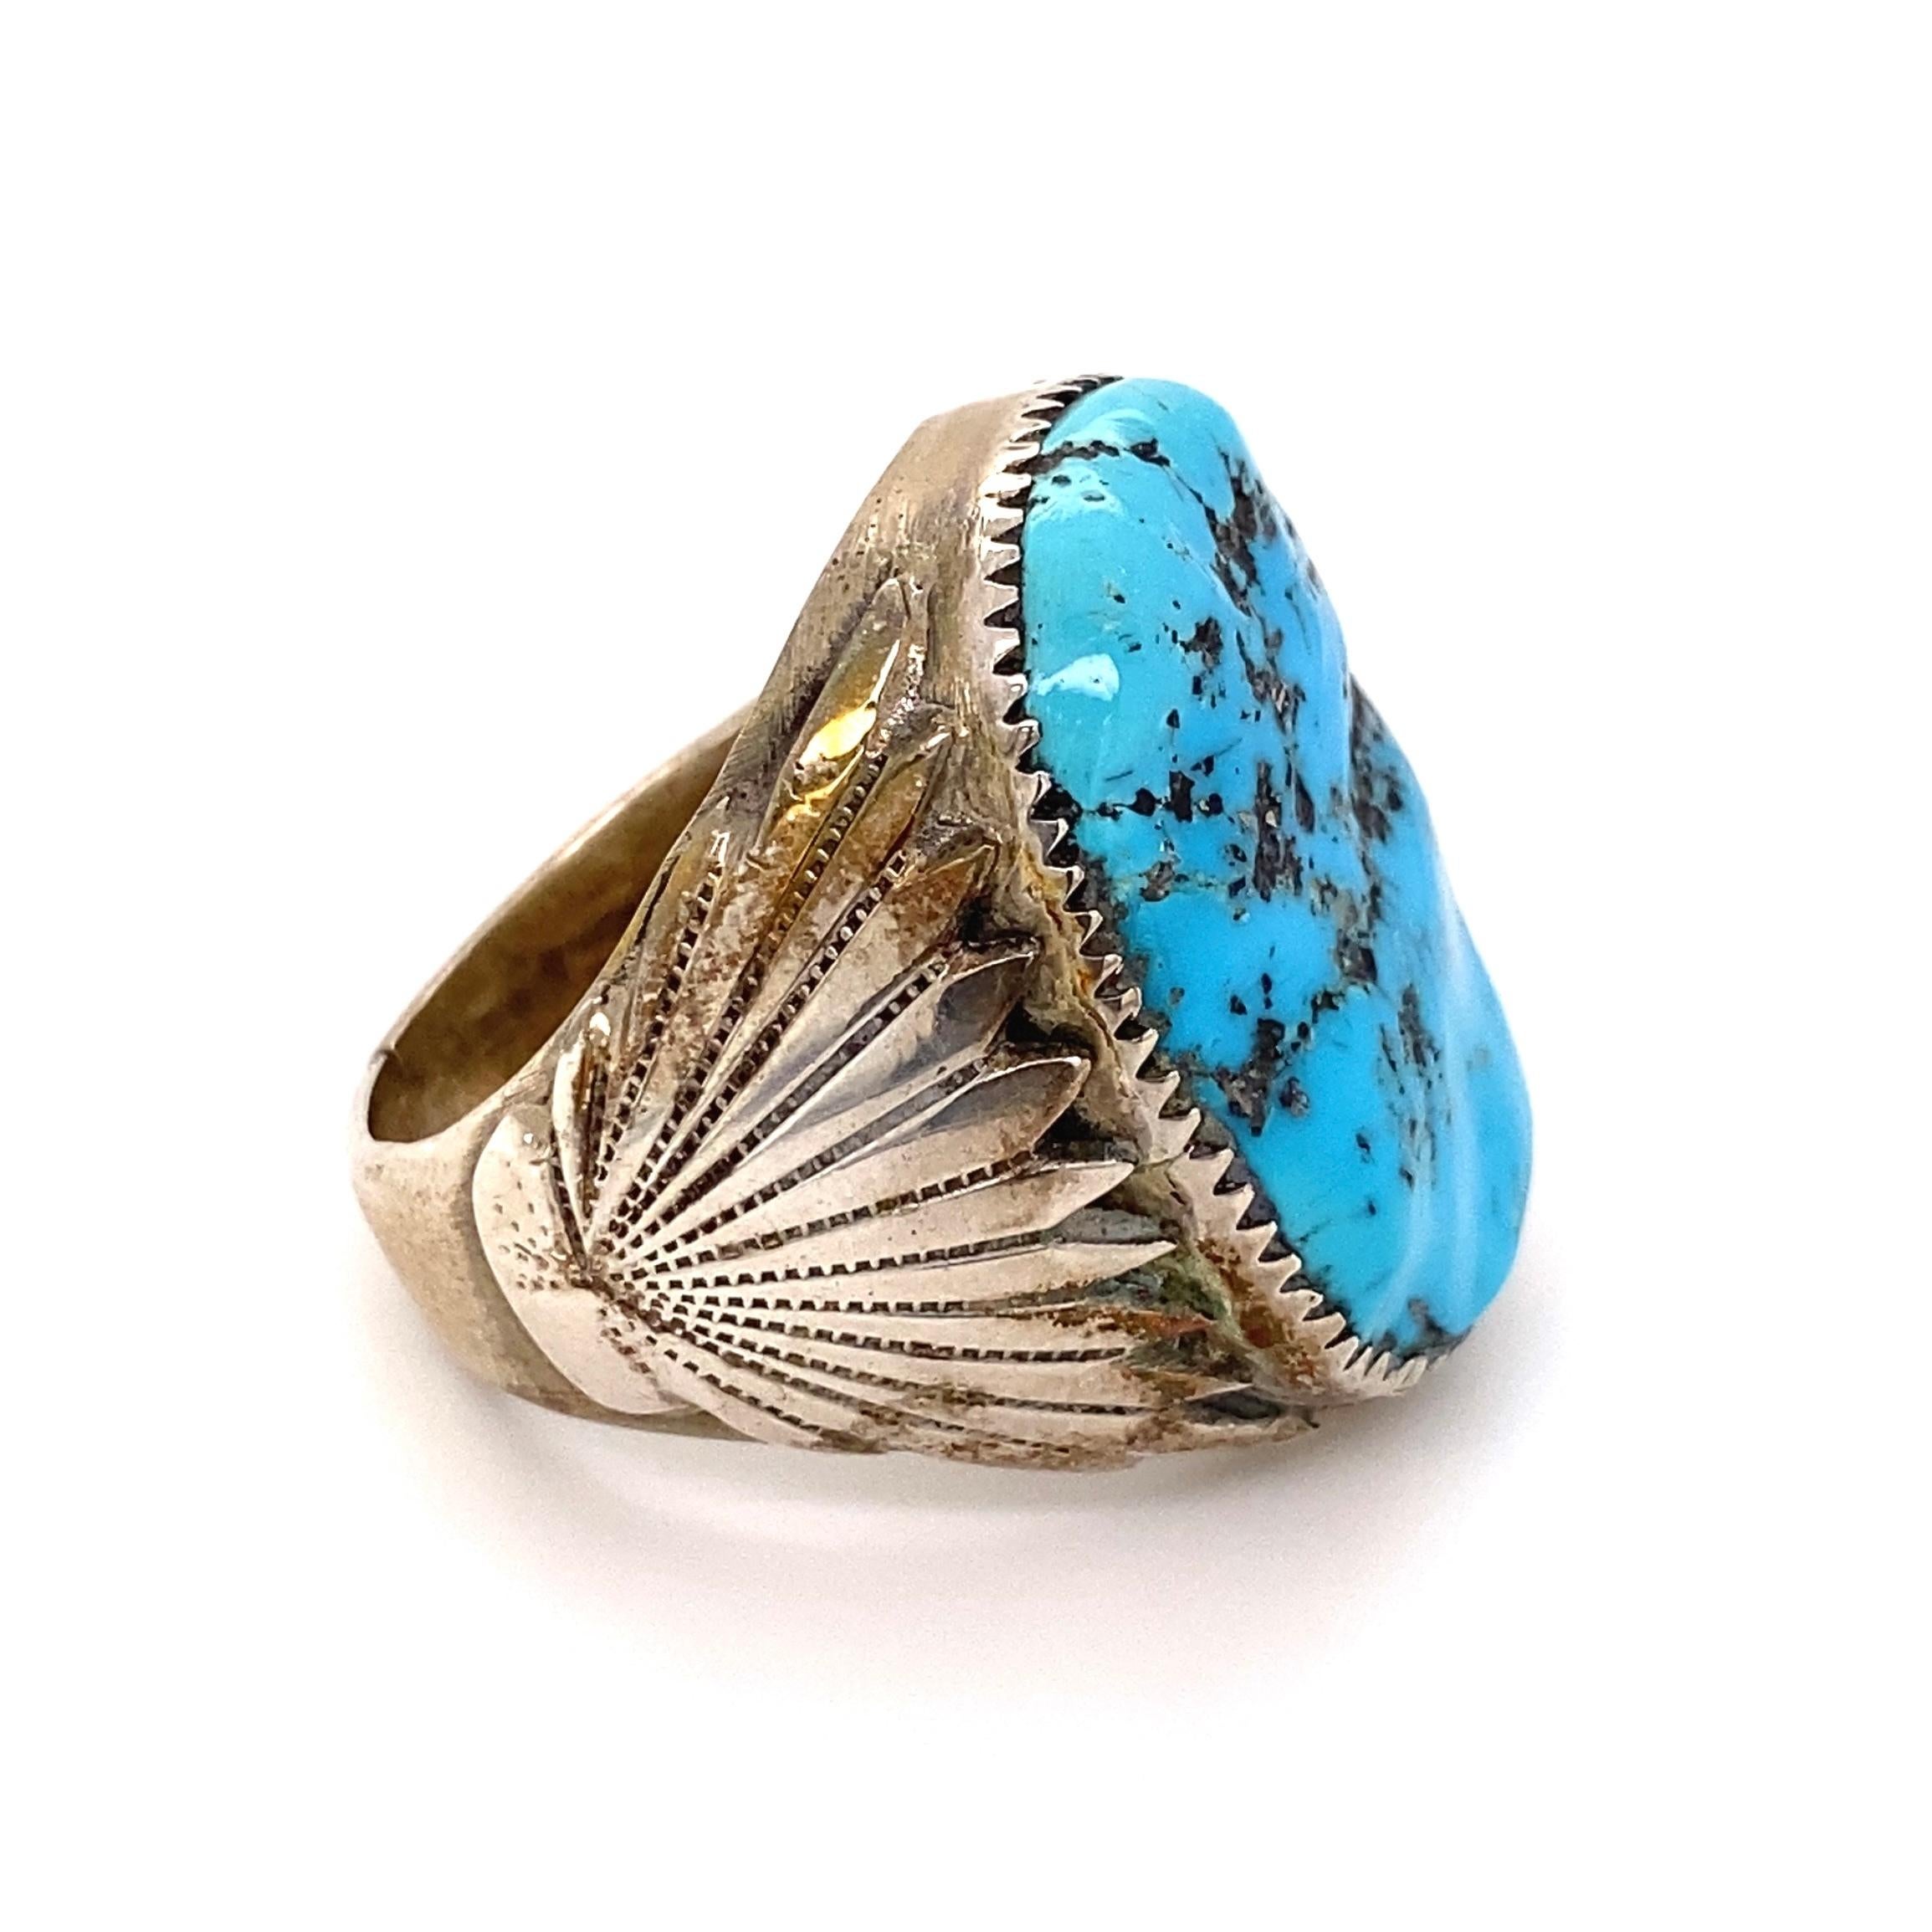 Awesome highly desirable Native American Navajo Signed RLB Designer 925 sterling silver men’s ring, centering a large Turquoise nugget in beautifully Hand crafted Sterling Silver frame. Measuring approx. 1.26” l x 1.12” w x 1.17” h. Ring size 13, we